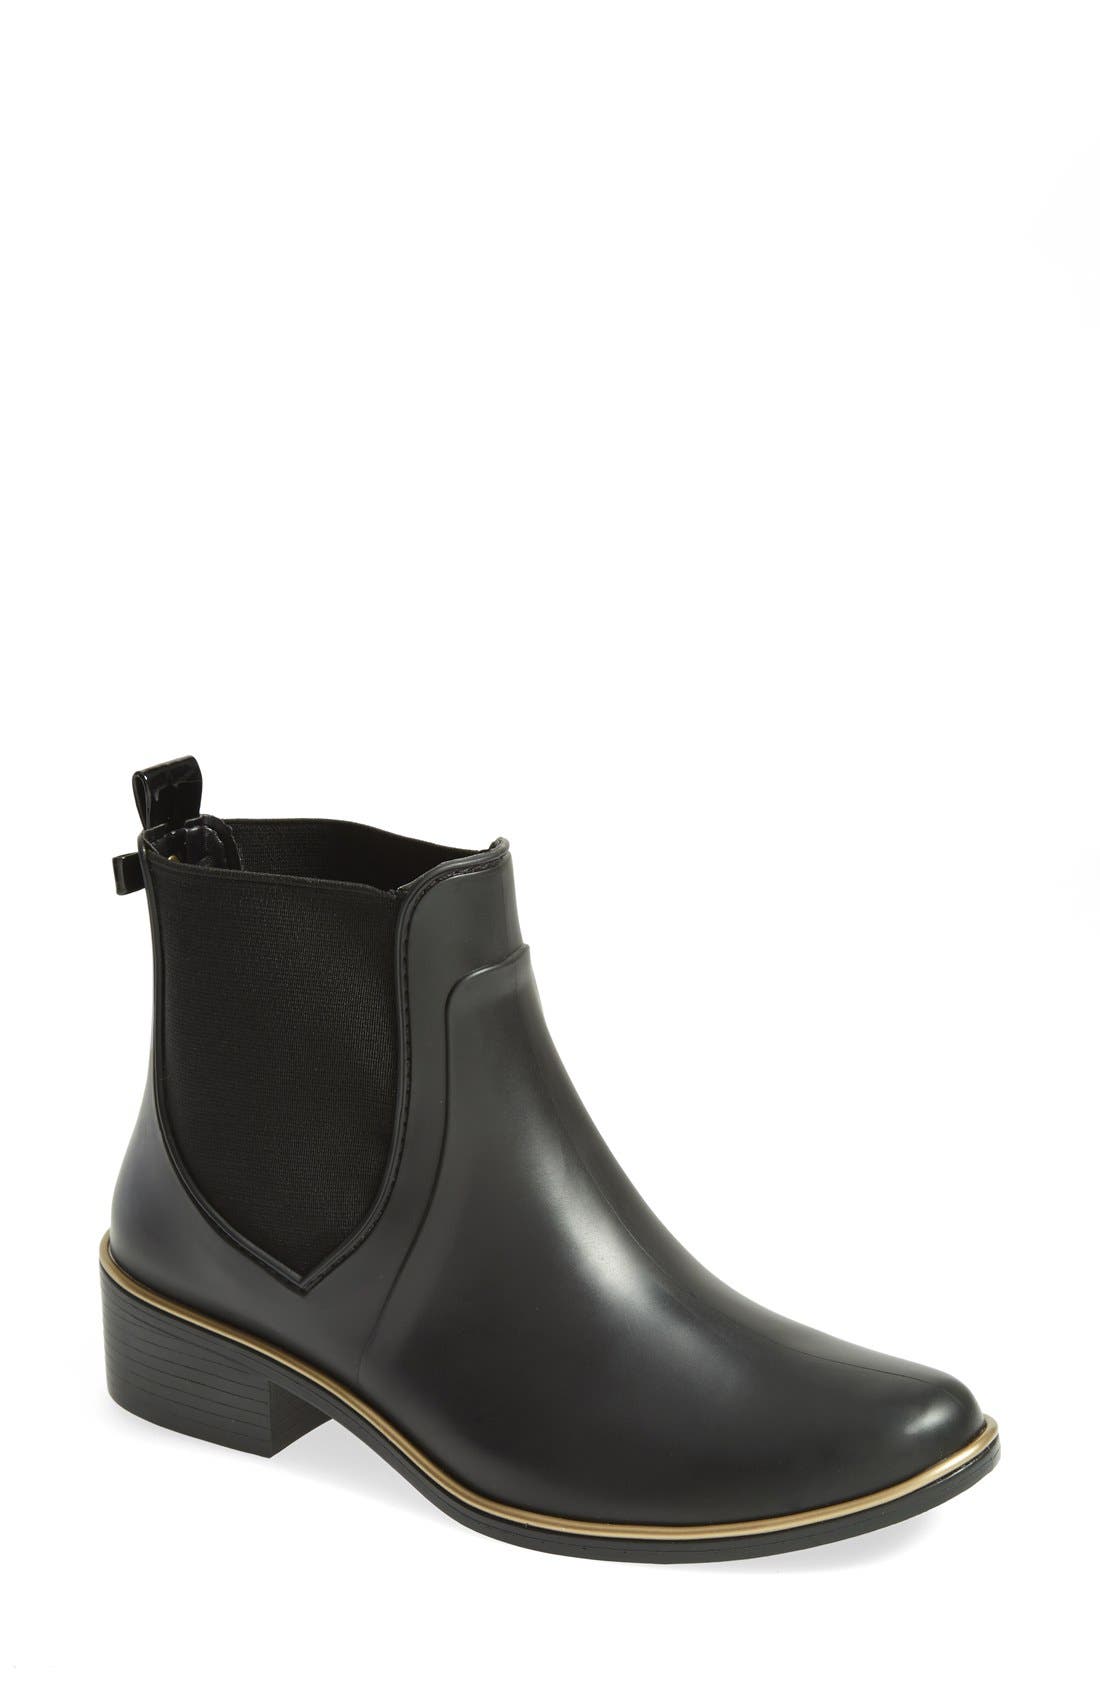 kate spade boots nordstrom